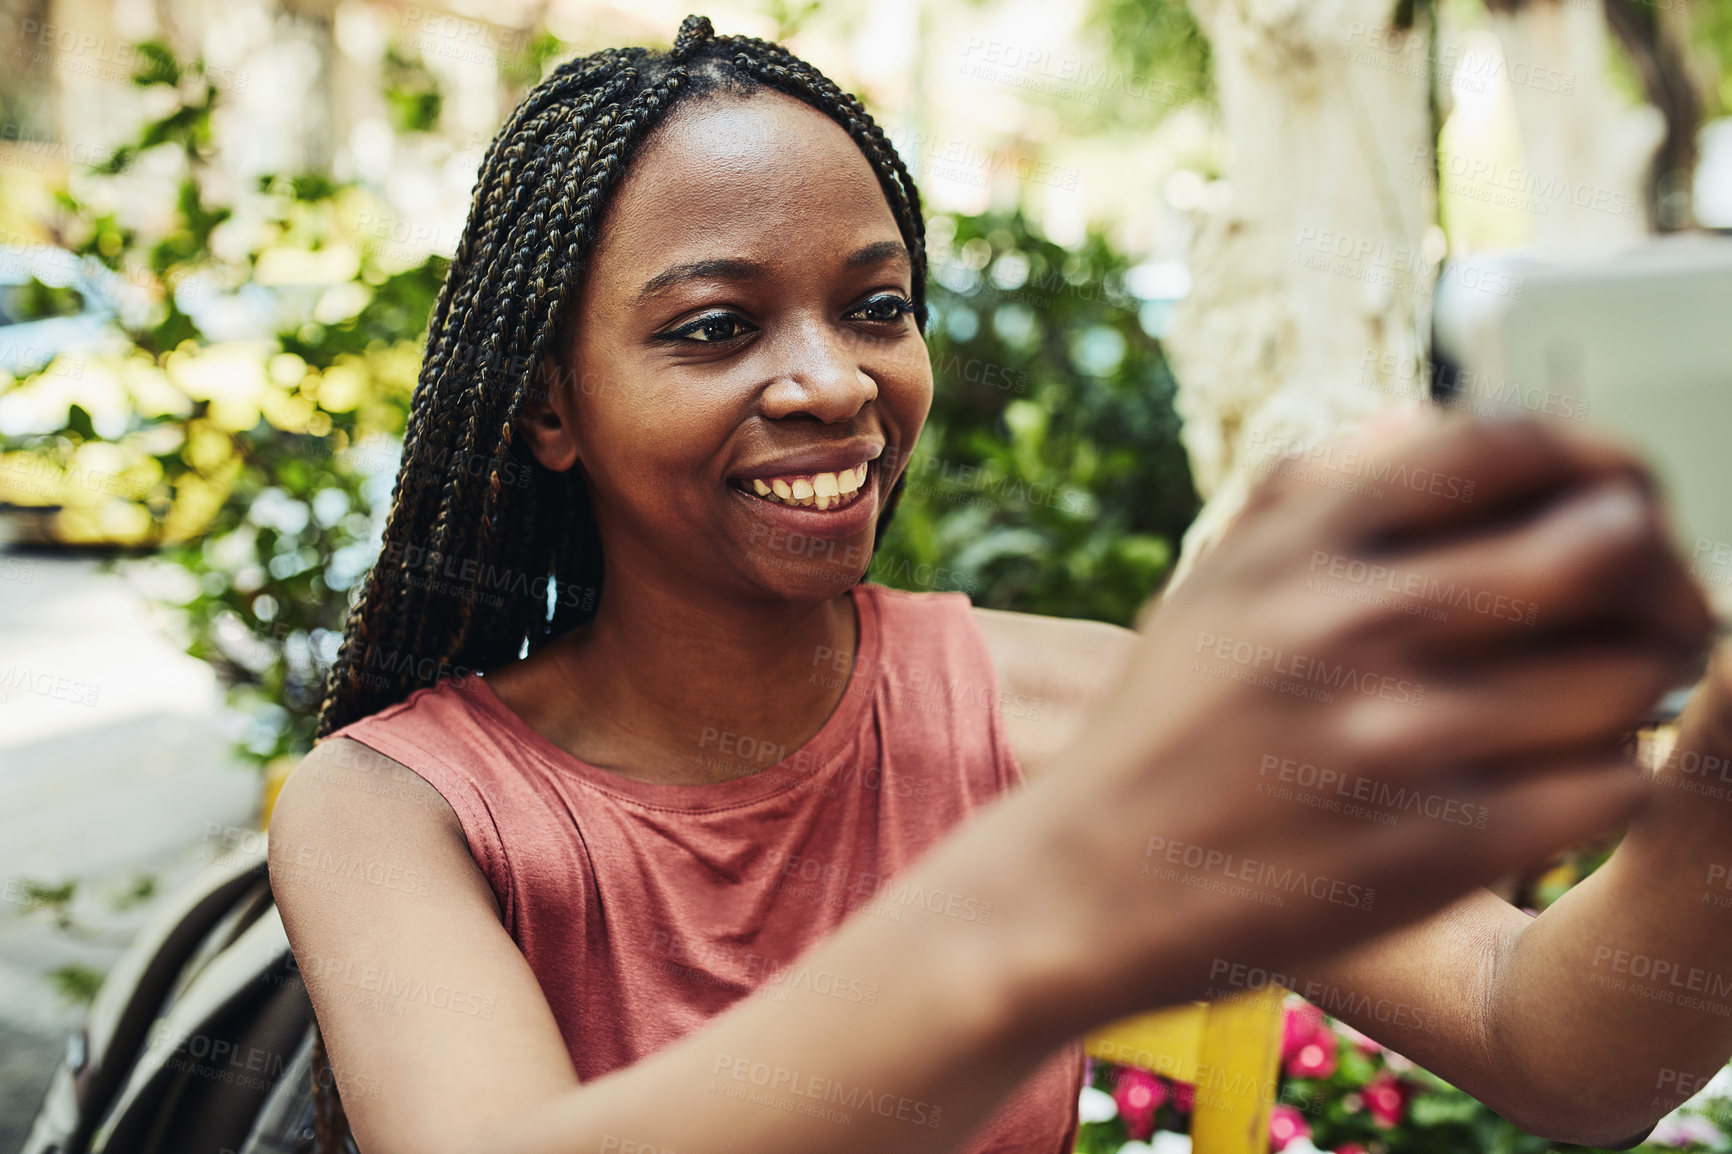 Buy stock photo Cropped shot of a young woman taking a selfie while out for lunch